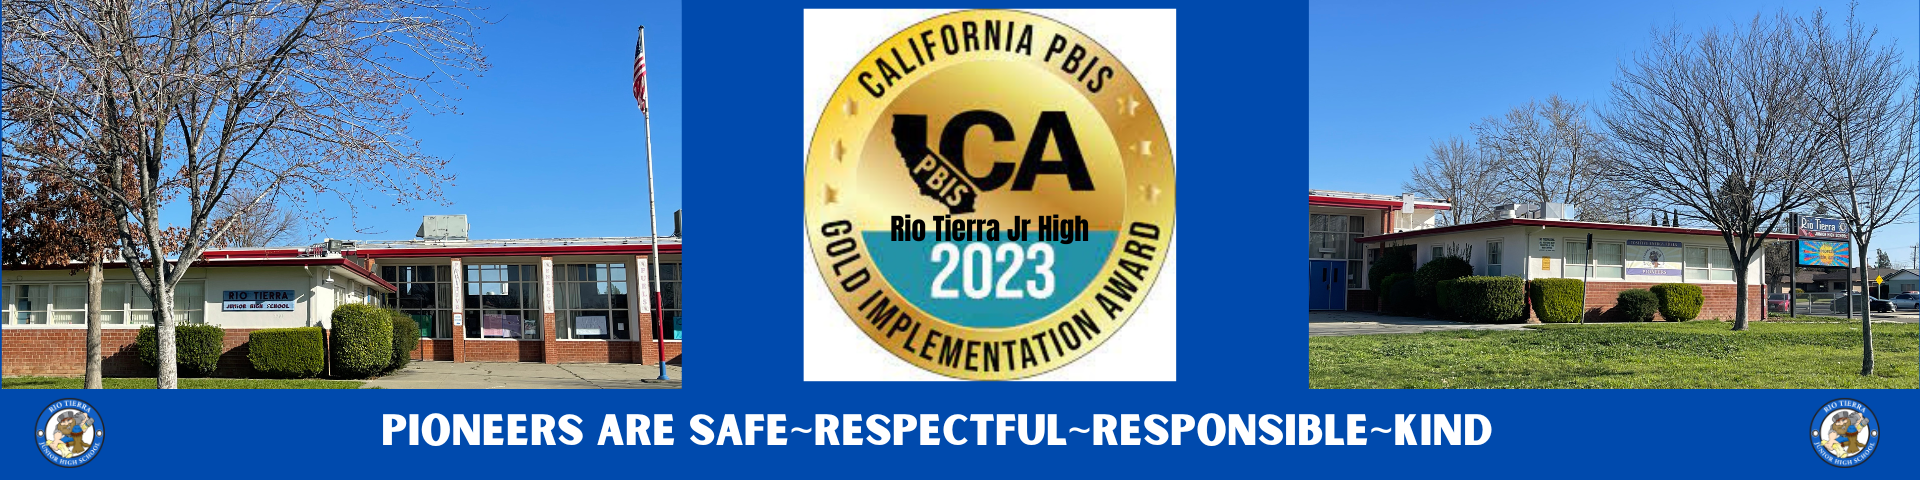 pioneers are safe, respectful, responsible, kind gold sea award